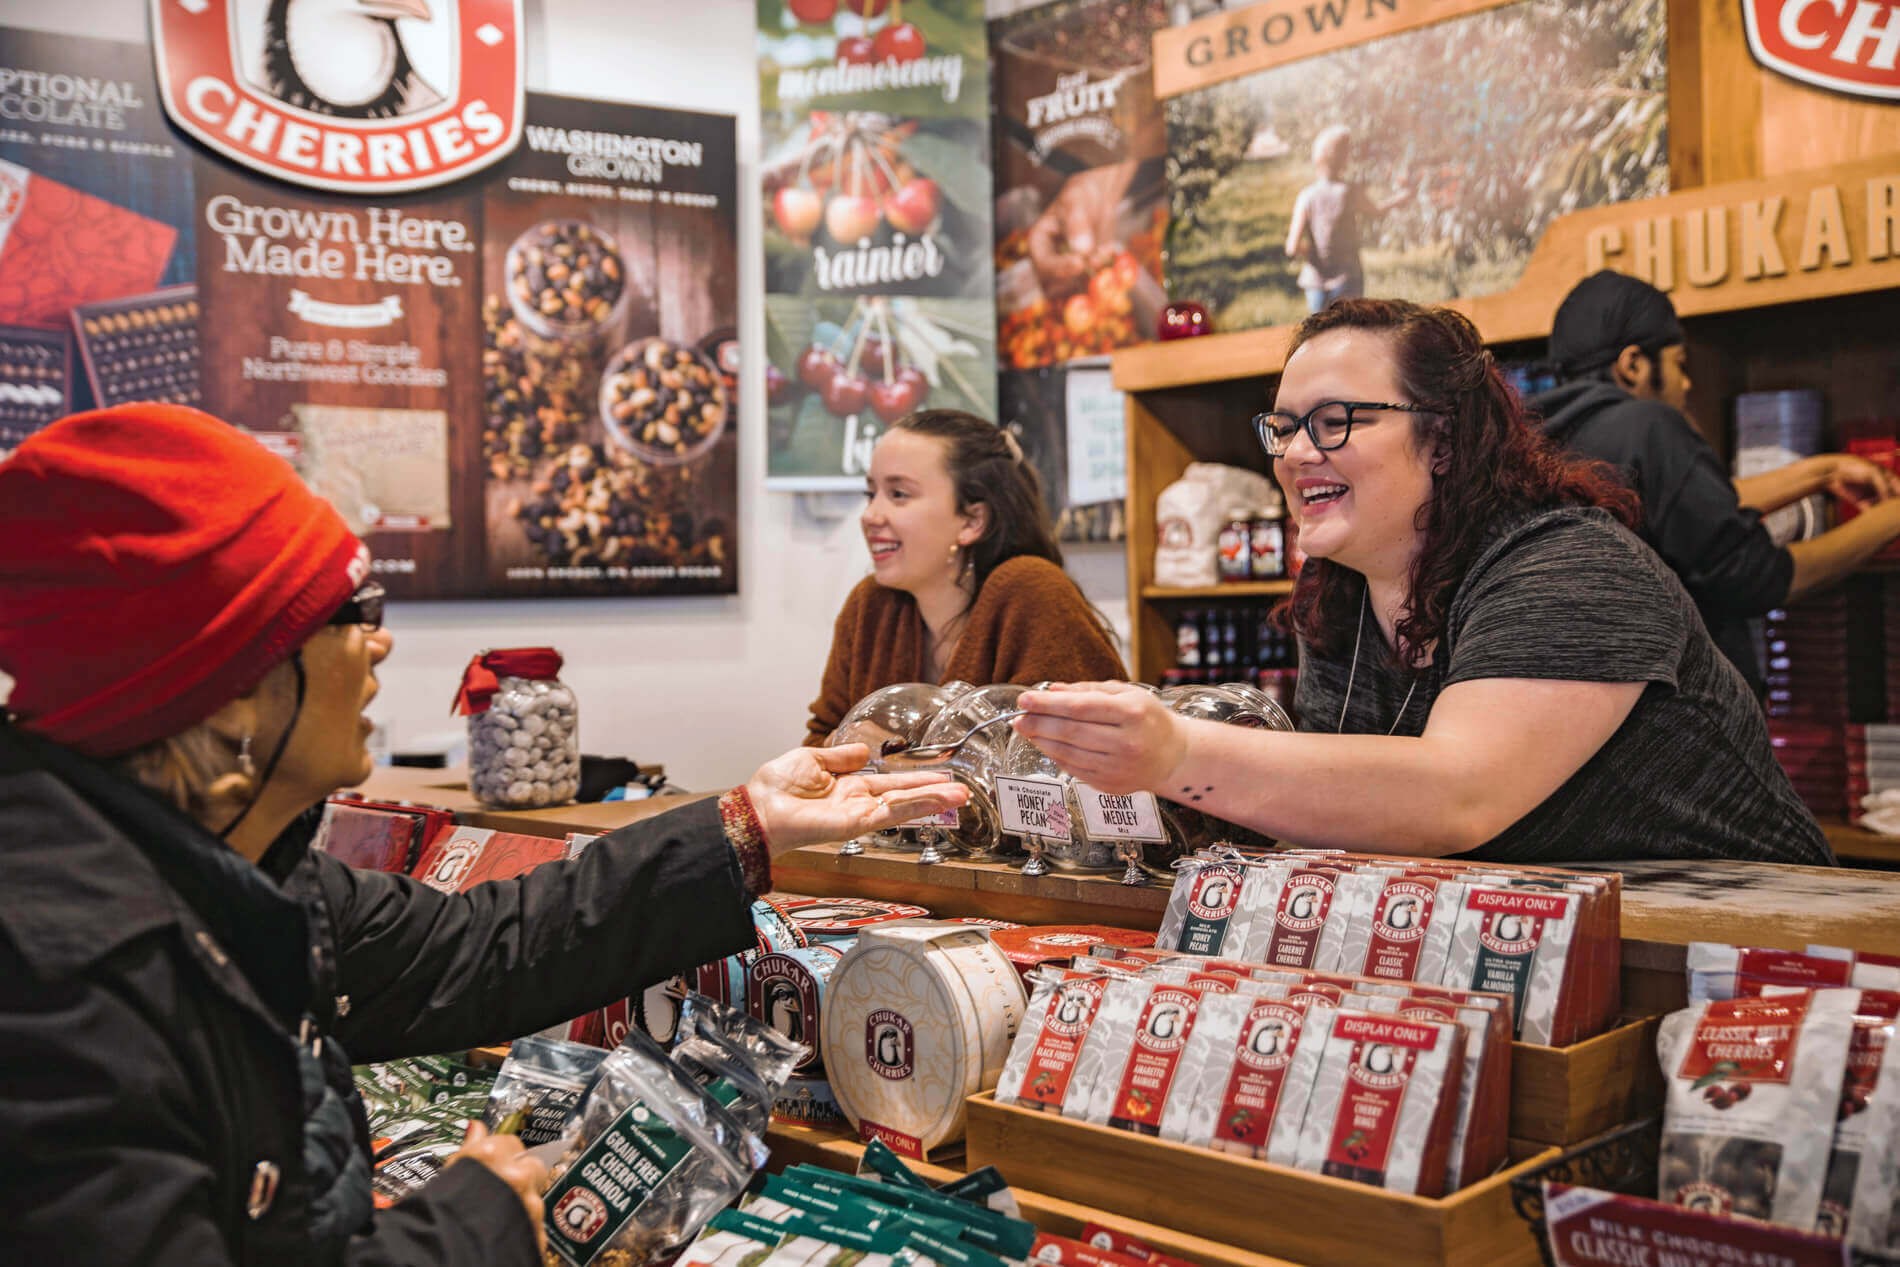 A woman beind a counter hands a customer a sample in the Chukar Cherries store